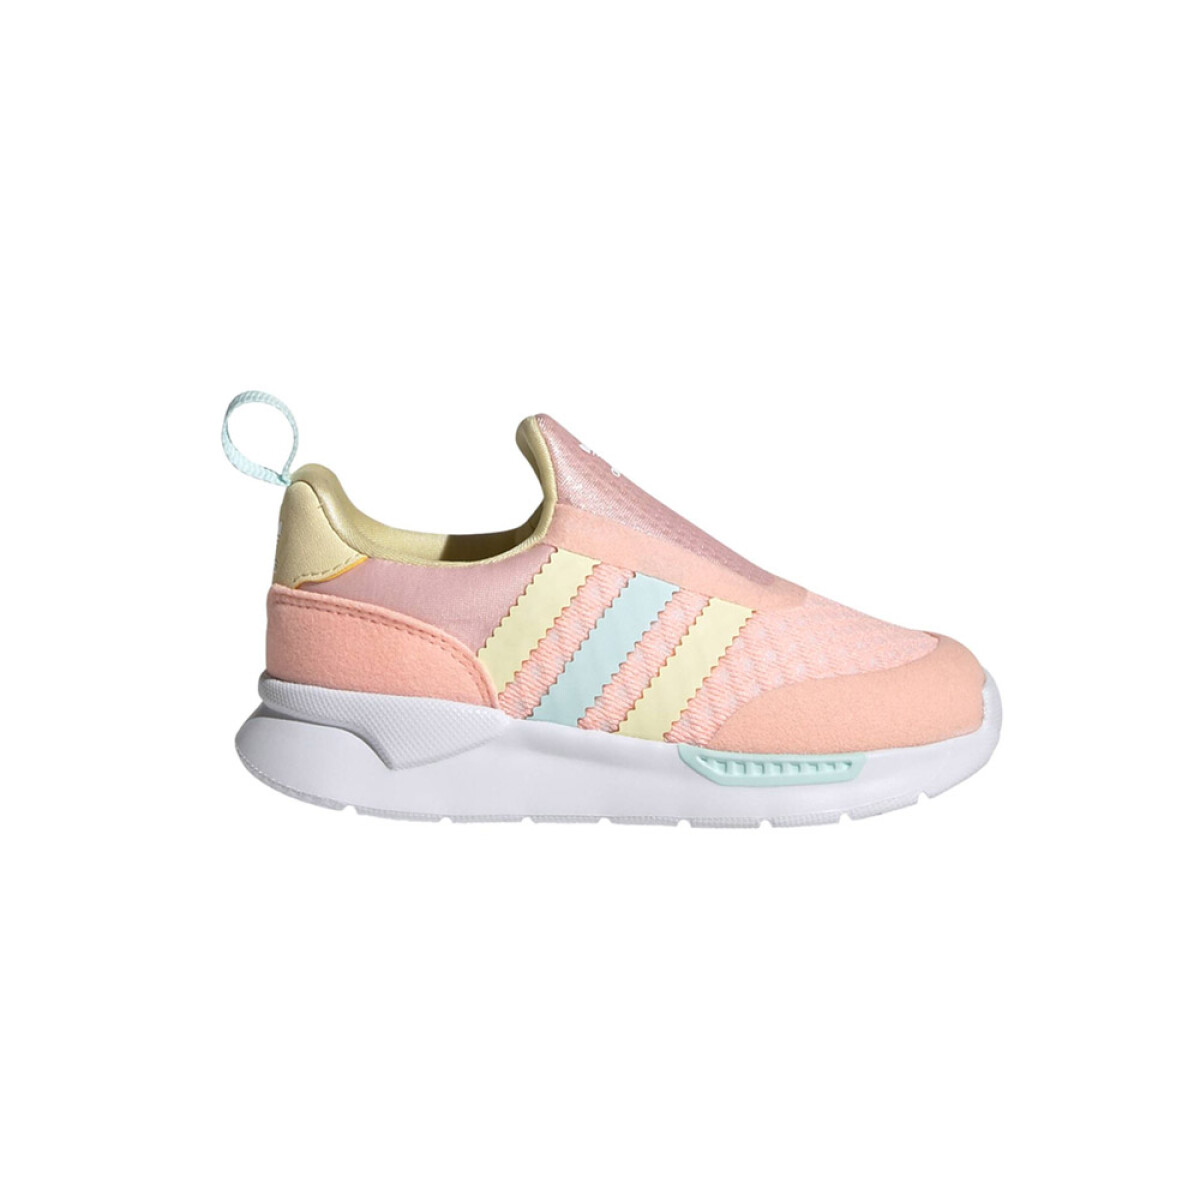 adidas ZX 360 - Coral/Yellow/Mint 